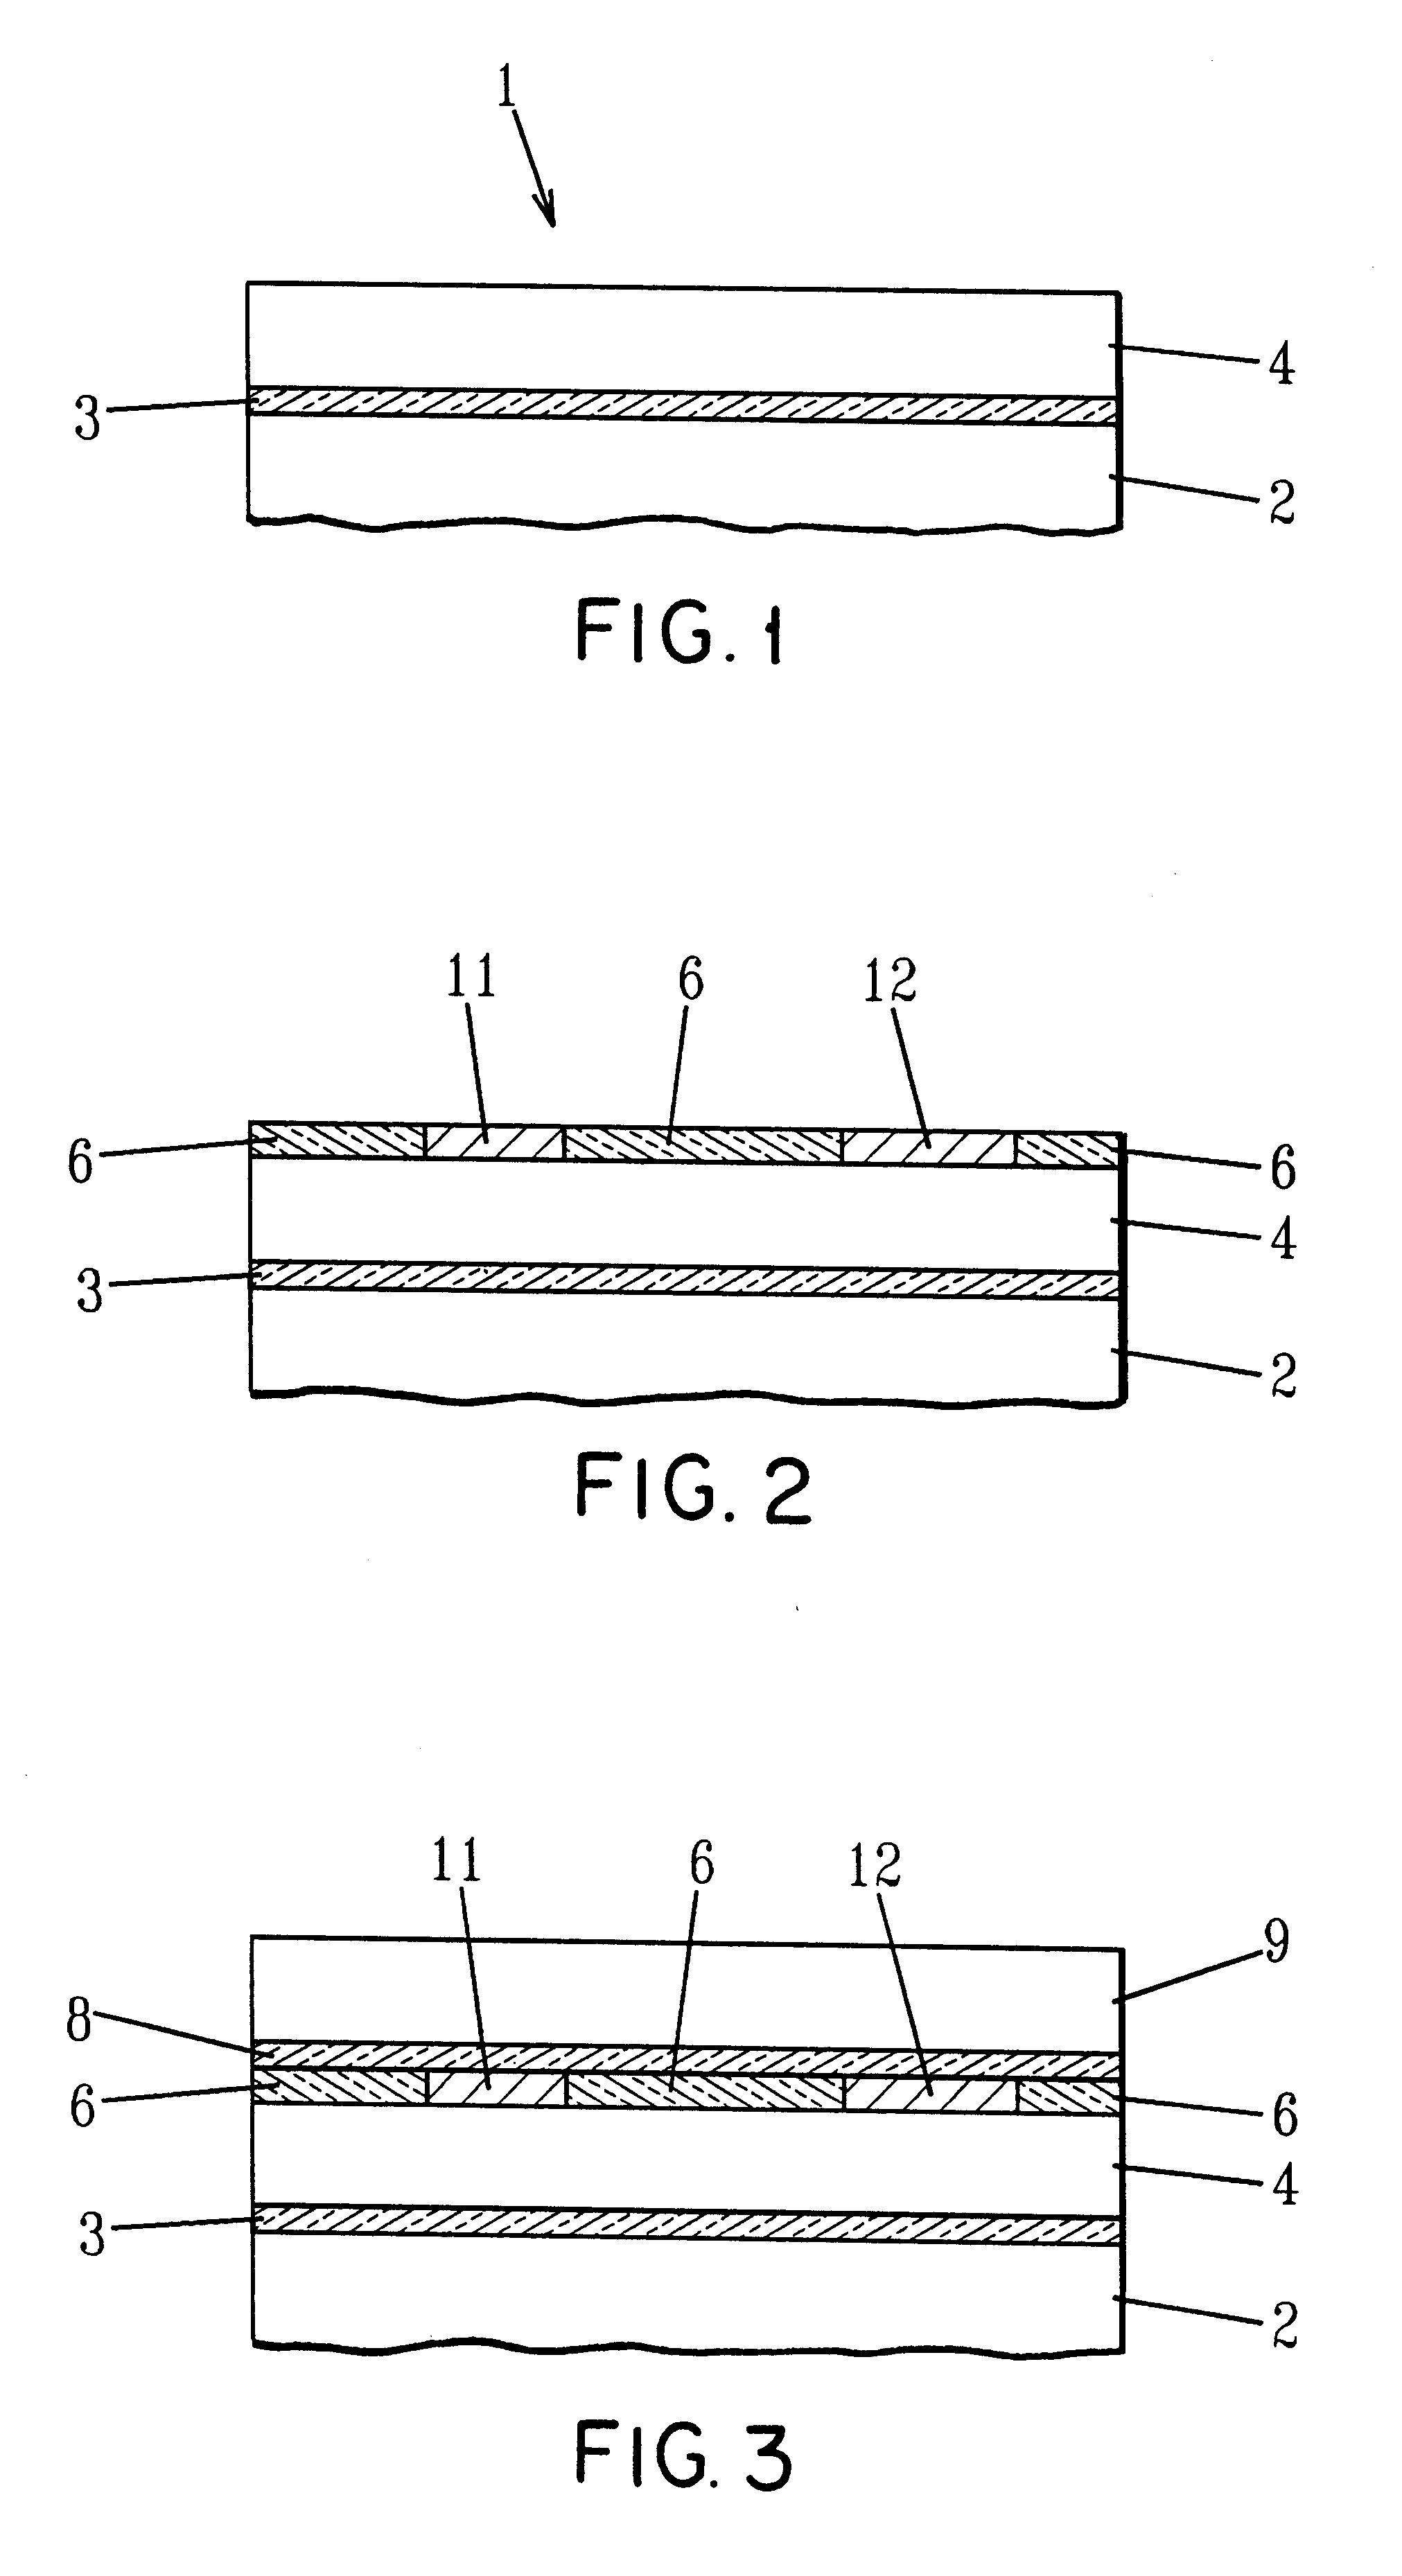 Multistack 3-dimensional high density semiconductor device and method for fabrication